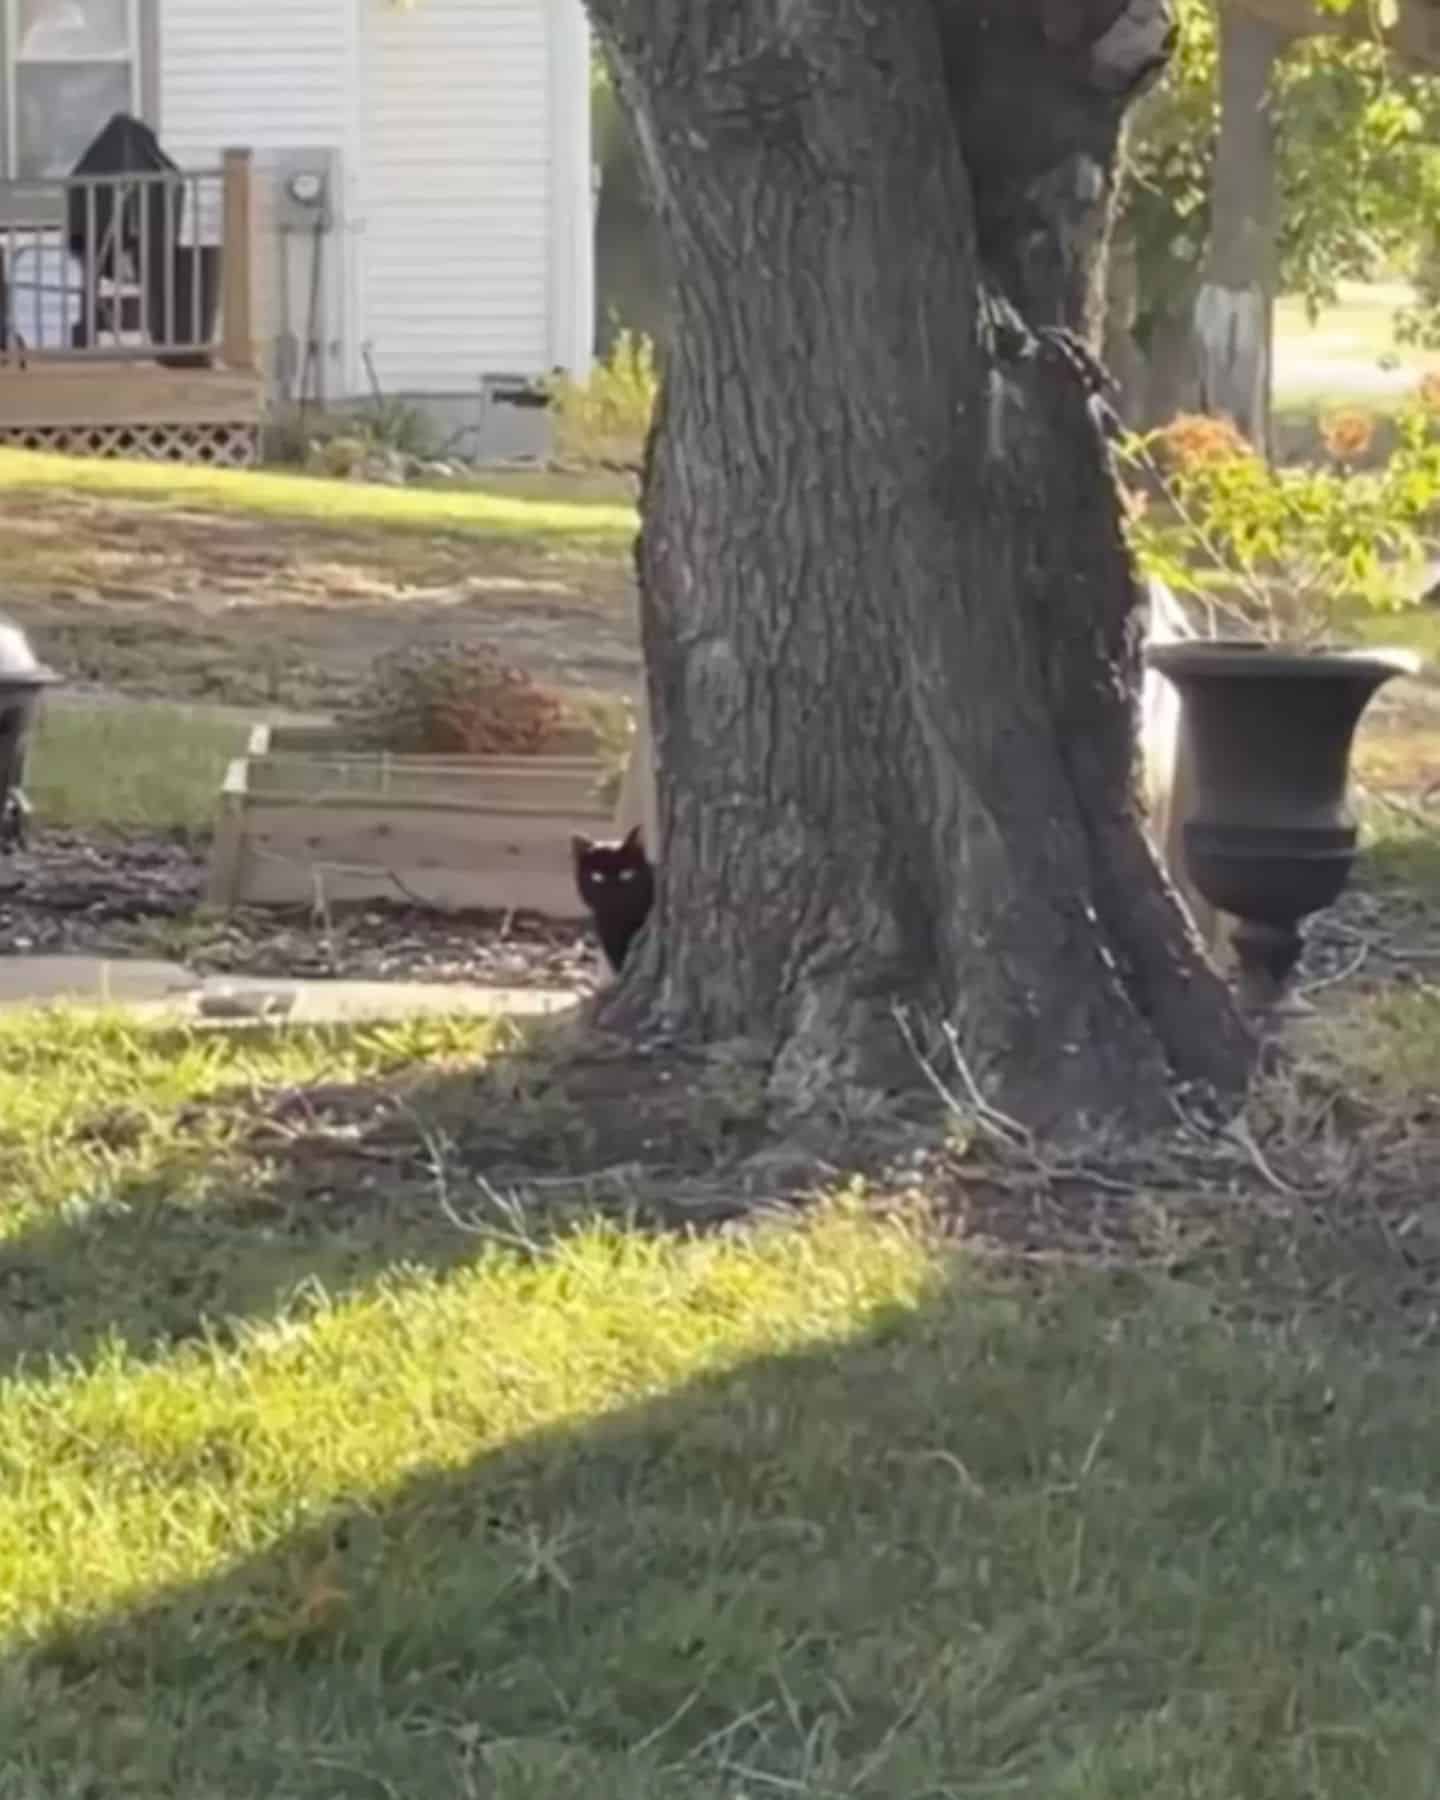 stray cat standing behind the tree